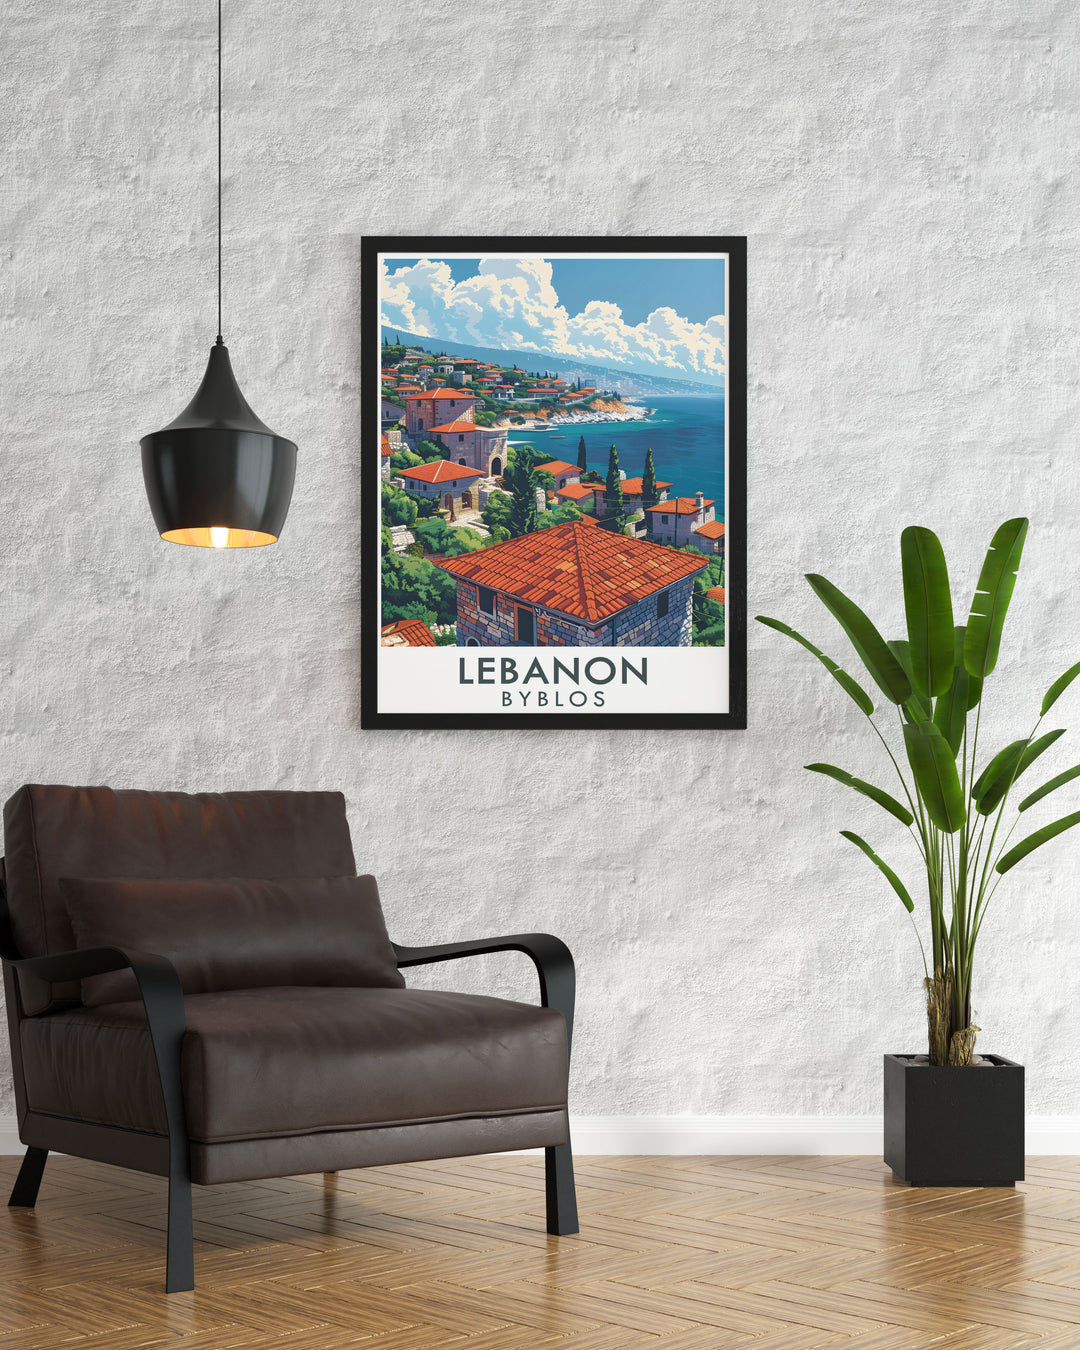 Beirut Photo highlighting the modernity and tradition of the city with Byblos travel poster offering a glimpse into the ancient citys captivating past making perfect gifts for any occasion